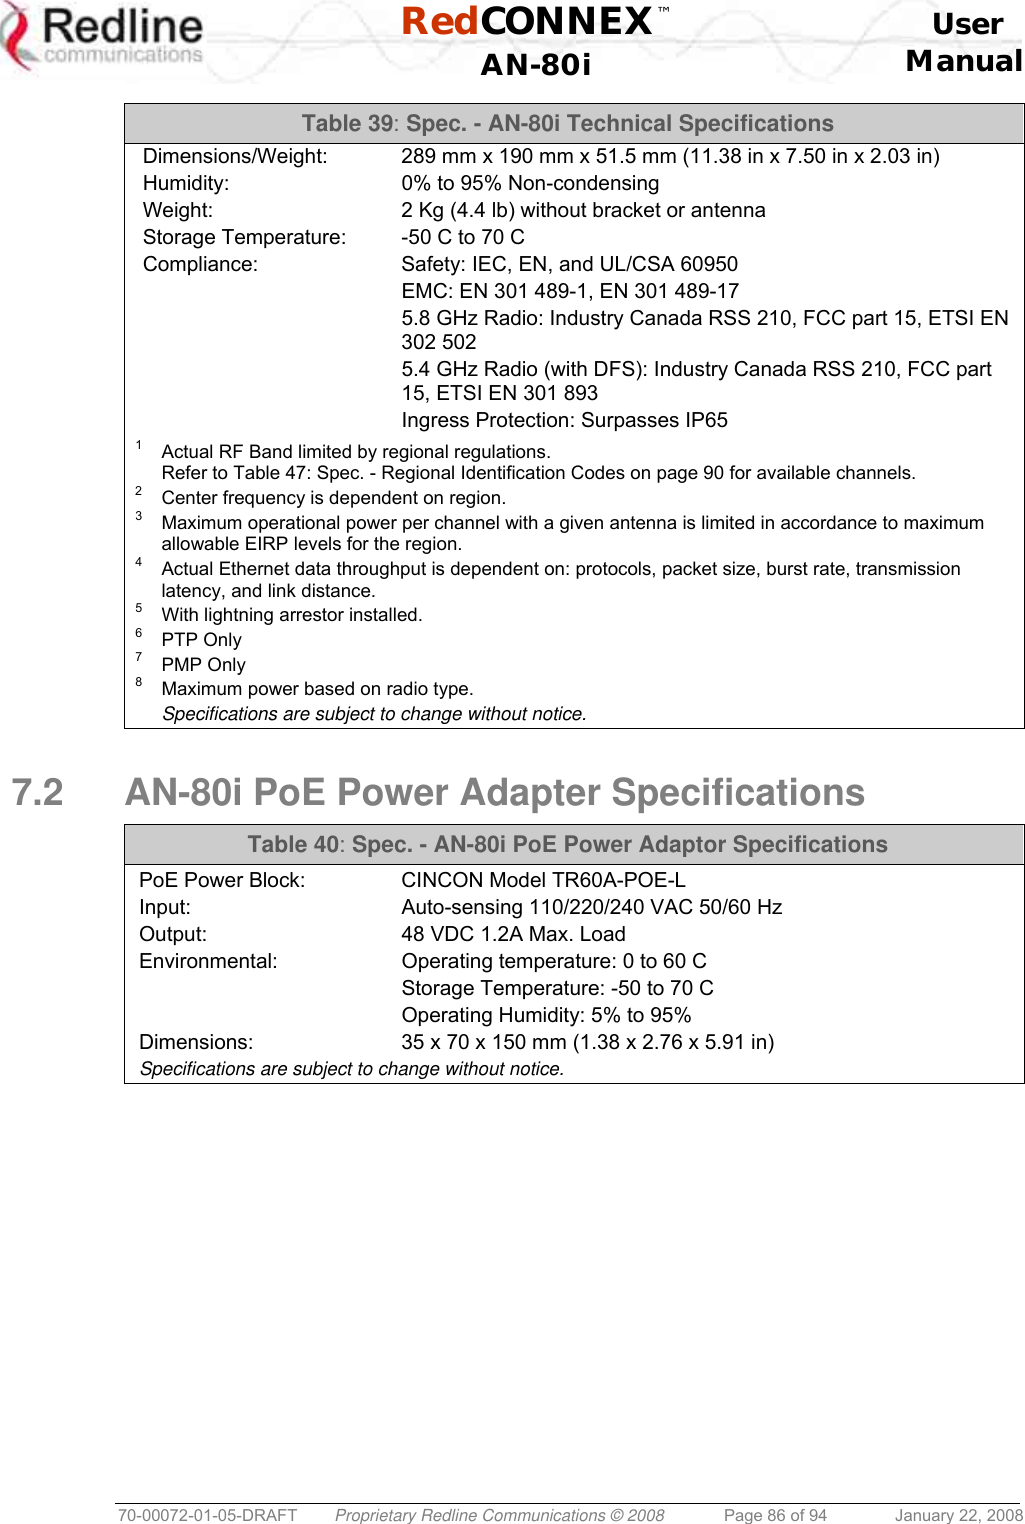  RedCONNEX™    User  AN-80i Manual  70-00072-01-05-DRAFT  Proprietary Redline Communications © 2008  Page 86 of 94  January 22, 2008 Table 39: Spec. - AN-80i Technical Specifications Dimensions/Weight:  289 mm x 190 mm x 51.5 mm (11.38 in x 7.50 in x 2.03 in) Humidity:  0% to 95% Non-condensing Weight:  2 Kg (4.4 lb) without bracket or antenna Storage Temperature:  -50 C to 70 C Compliance:  Safety: IEC, EN, and UL/CSA 60950   EMC: EN 301 489-1, EN 301 489-17   5.8 GHz Radio: Industry Canada RSS 210, FCC part 15, ETSI EN 302 502   5.4 GHz Radio (with DFS): Industry Canada RSS 210, FCC part 15, ETSI EN 301 893   Ingress Protection: Surpasses IP65  1   Actual RF Band limited by regional regulations. Refer to Table 47: Spec. - Regional Identification Codes on page 90 for available channels. 2   Center frequency is dependent on region. 3   Maximum operational power per channel with a given antenna is limited in accordance to maximum allowable EIRP levels for the region. 4   Actual Ethernet data throughput is dependent on: protocols, packet size, burst rate, transmission latency, and link distance. 5   With lightning arrestor installed. 6   PTP Only 7   PMP Only 8   Maximum power based on radio type.  Specifications are subject to change without notice.  7.2  AN-80i PoE Power Adapter Specifications  Table 40: Spec. - AN-80i PoE Power Adaptor Specifications PoE Power Block:  CINCON Model TR60A-POE-L Input:  Auto-sensing 110/220/240 VAC 50/60 Hz Output:  48 VDC 1.2A Max. Load Environmental:  Operating temperature: 0 to 60 C   Storage Temperature: -50 to 70 C   Operating Humidity: 5% to 95%  Dimensions:  35 x 70 x 150 mm (1.38 x 2.76 x 5.91 in) Specifications are subject to change without notice.  